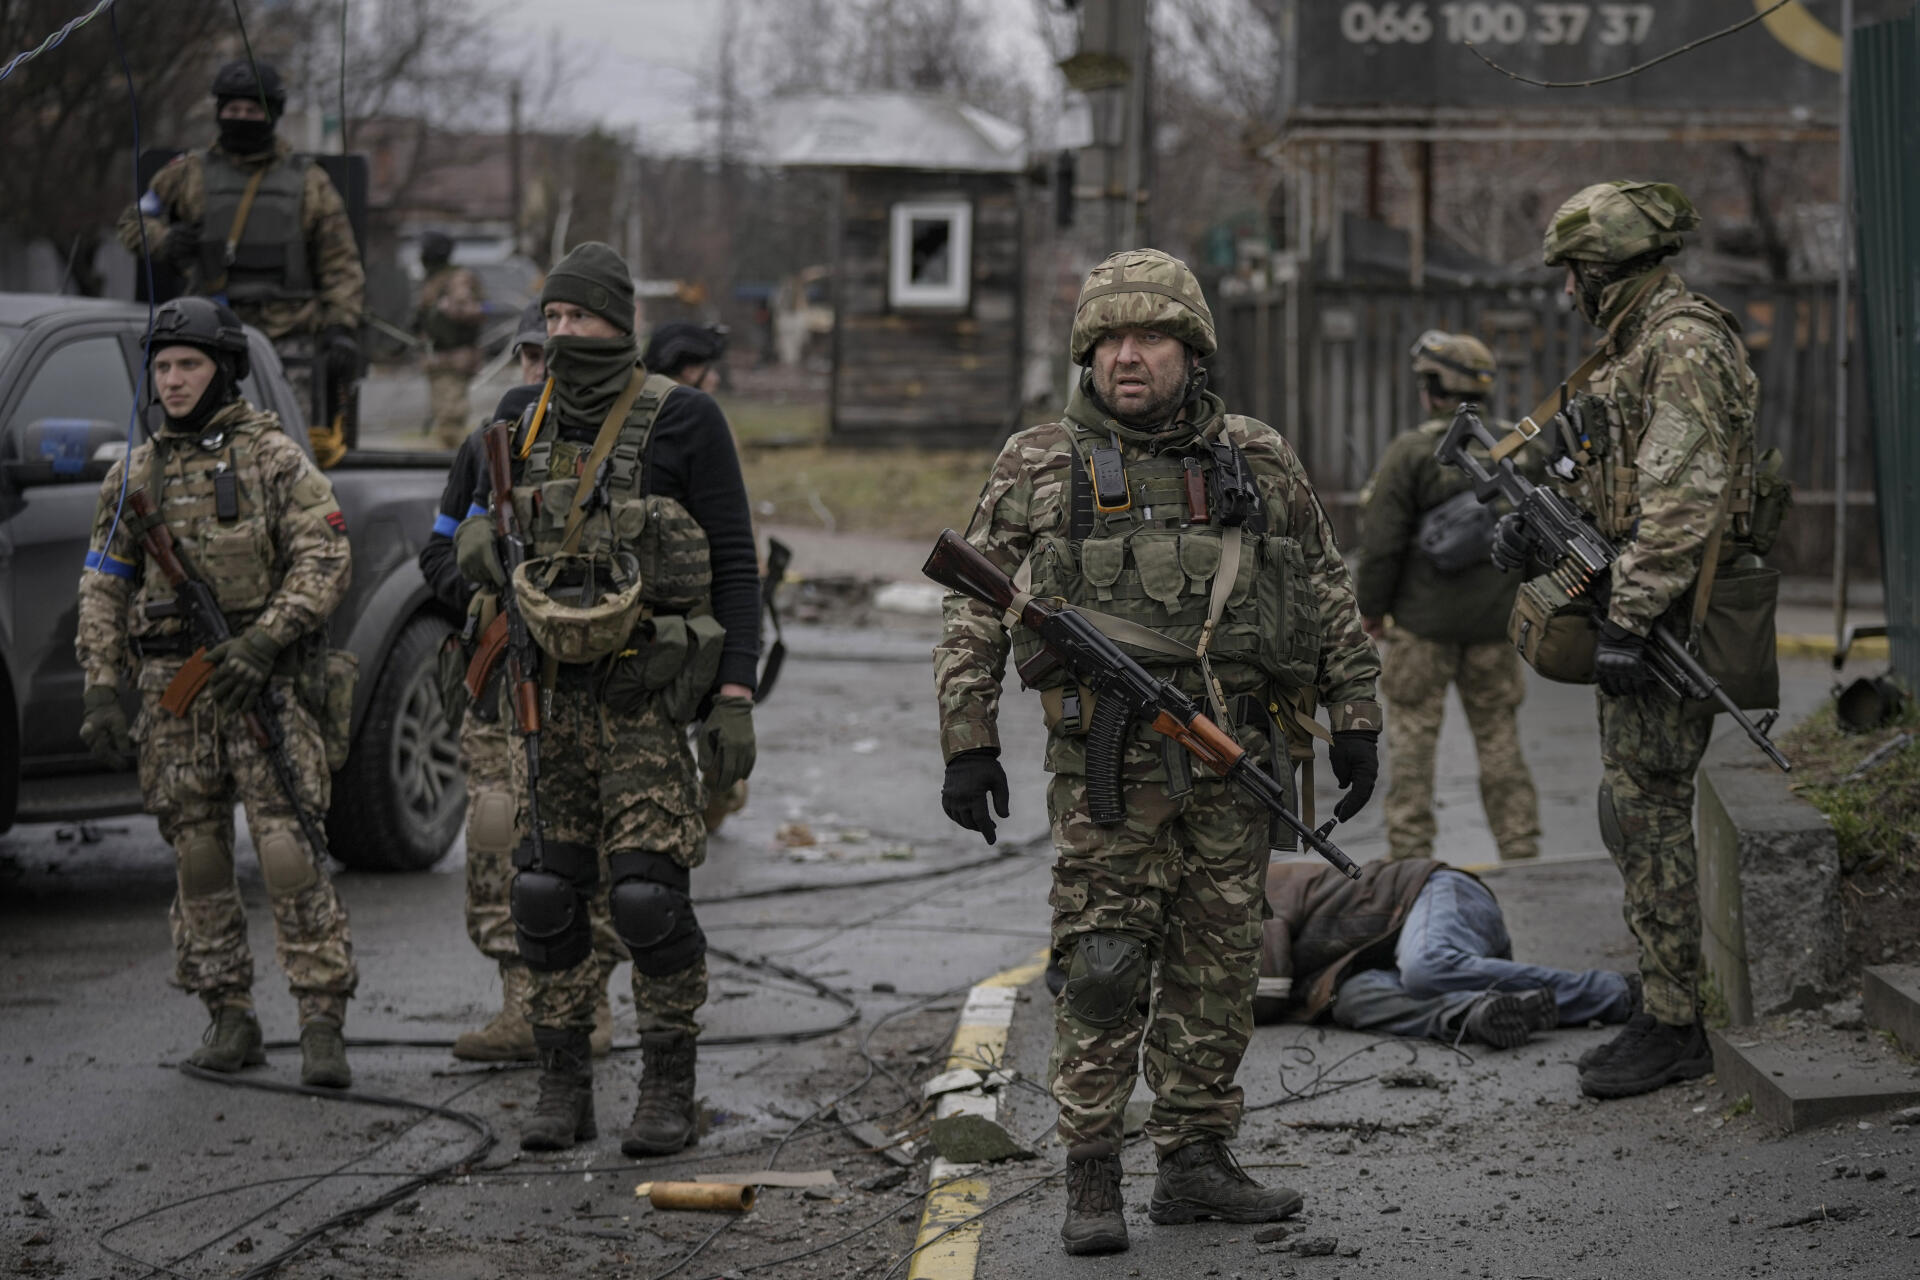 Ukrainian soldiers stand next to the body of a man dressed in civilian clothes, in Boutcha, a suburb of Kiev, occupied by the Russians, before being liberated, in Ukraine, Saturday, April 2, 2022.